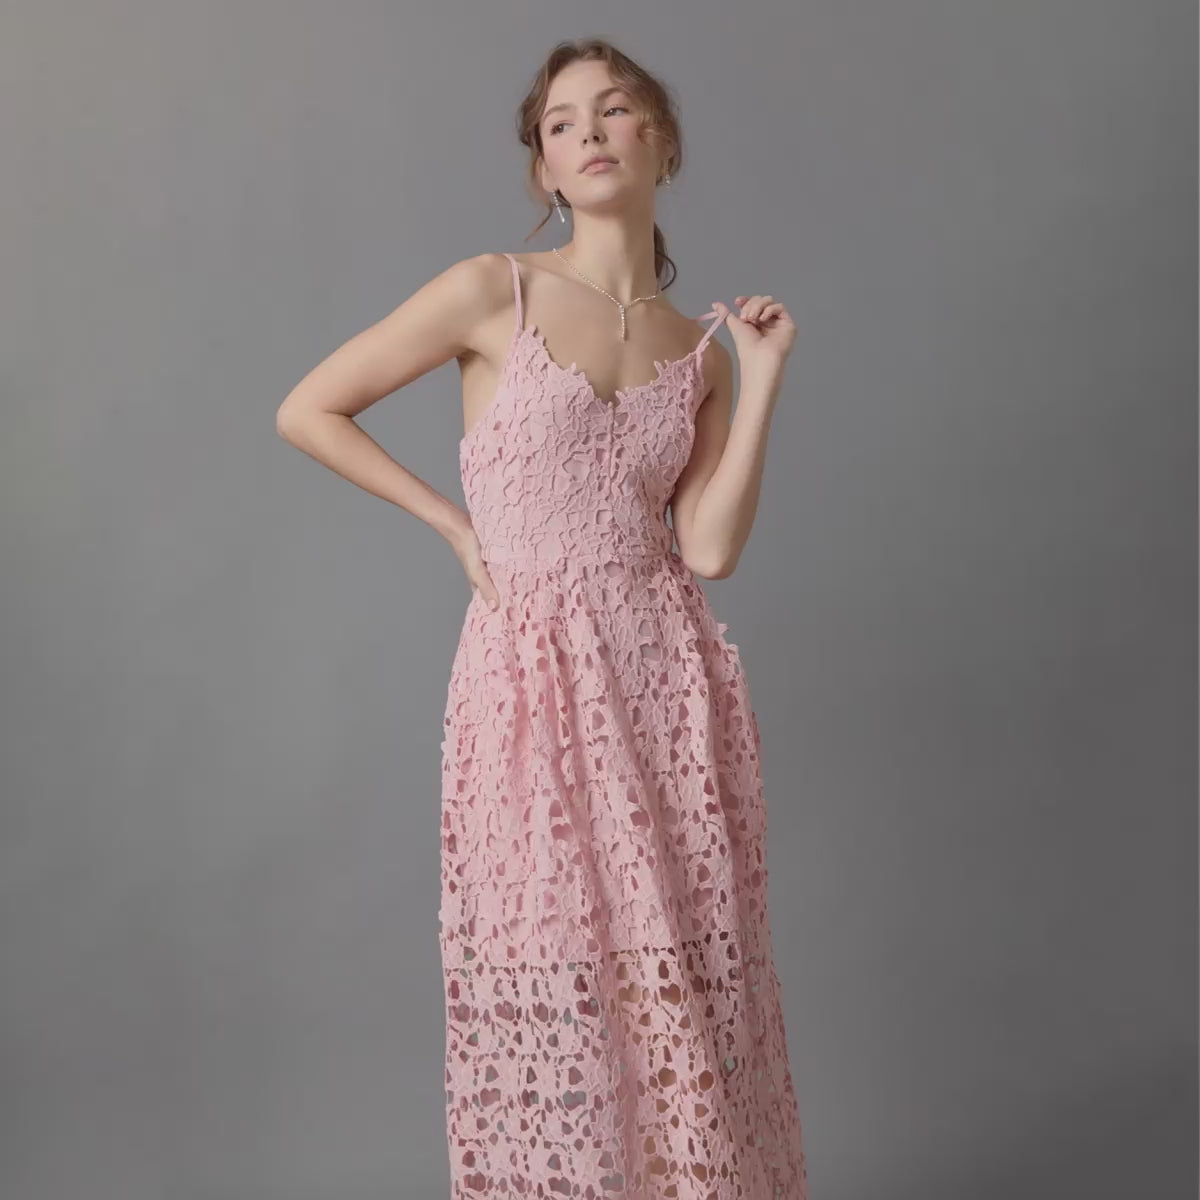 Shop the Lace Midi Dresses from Endless Rose at endlessrose.com